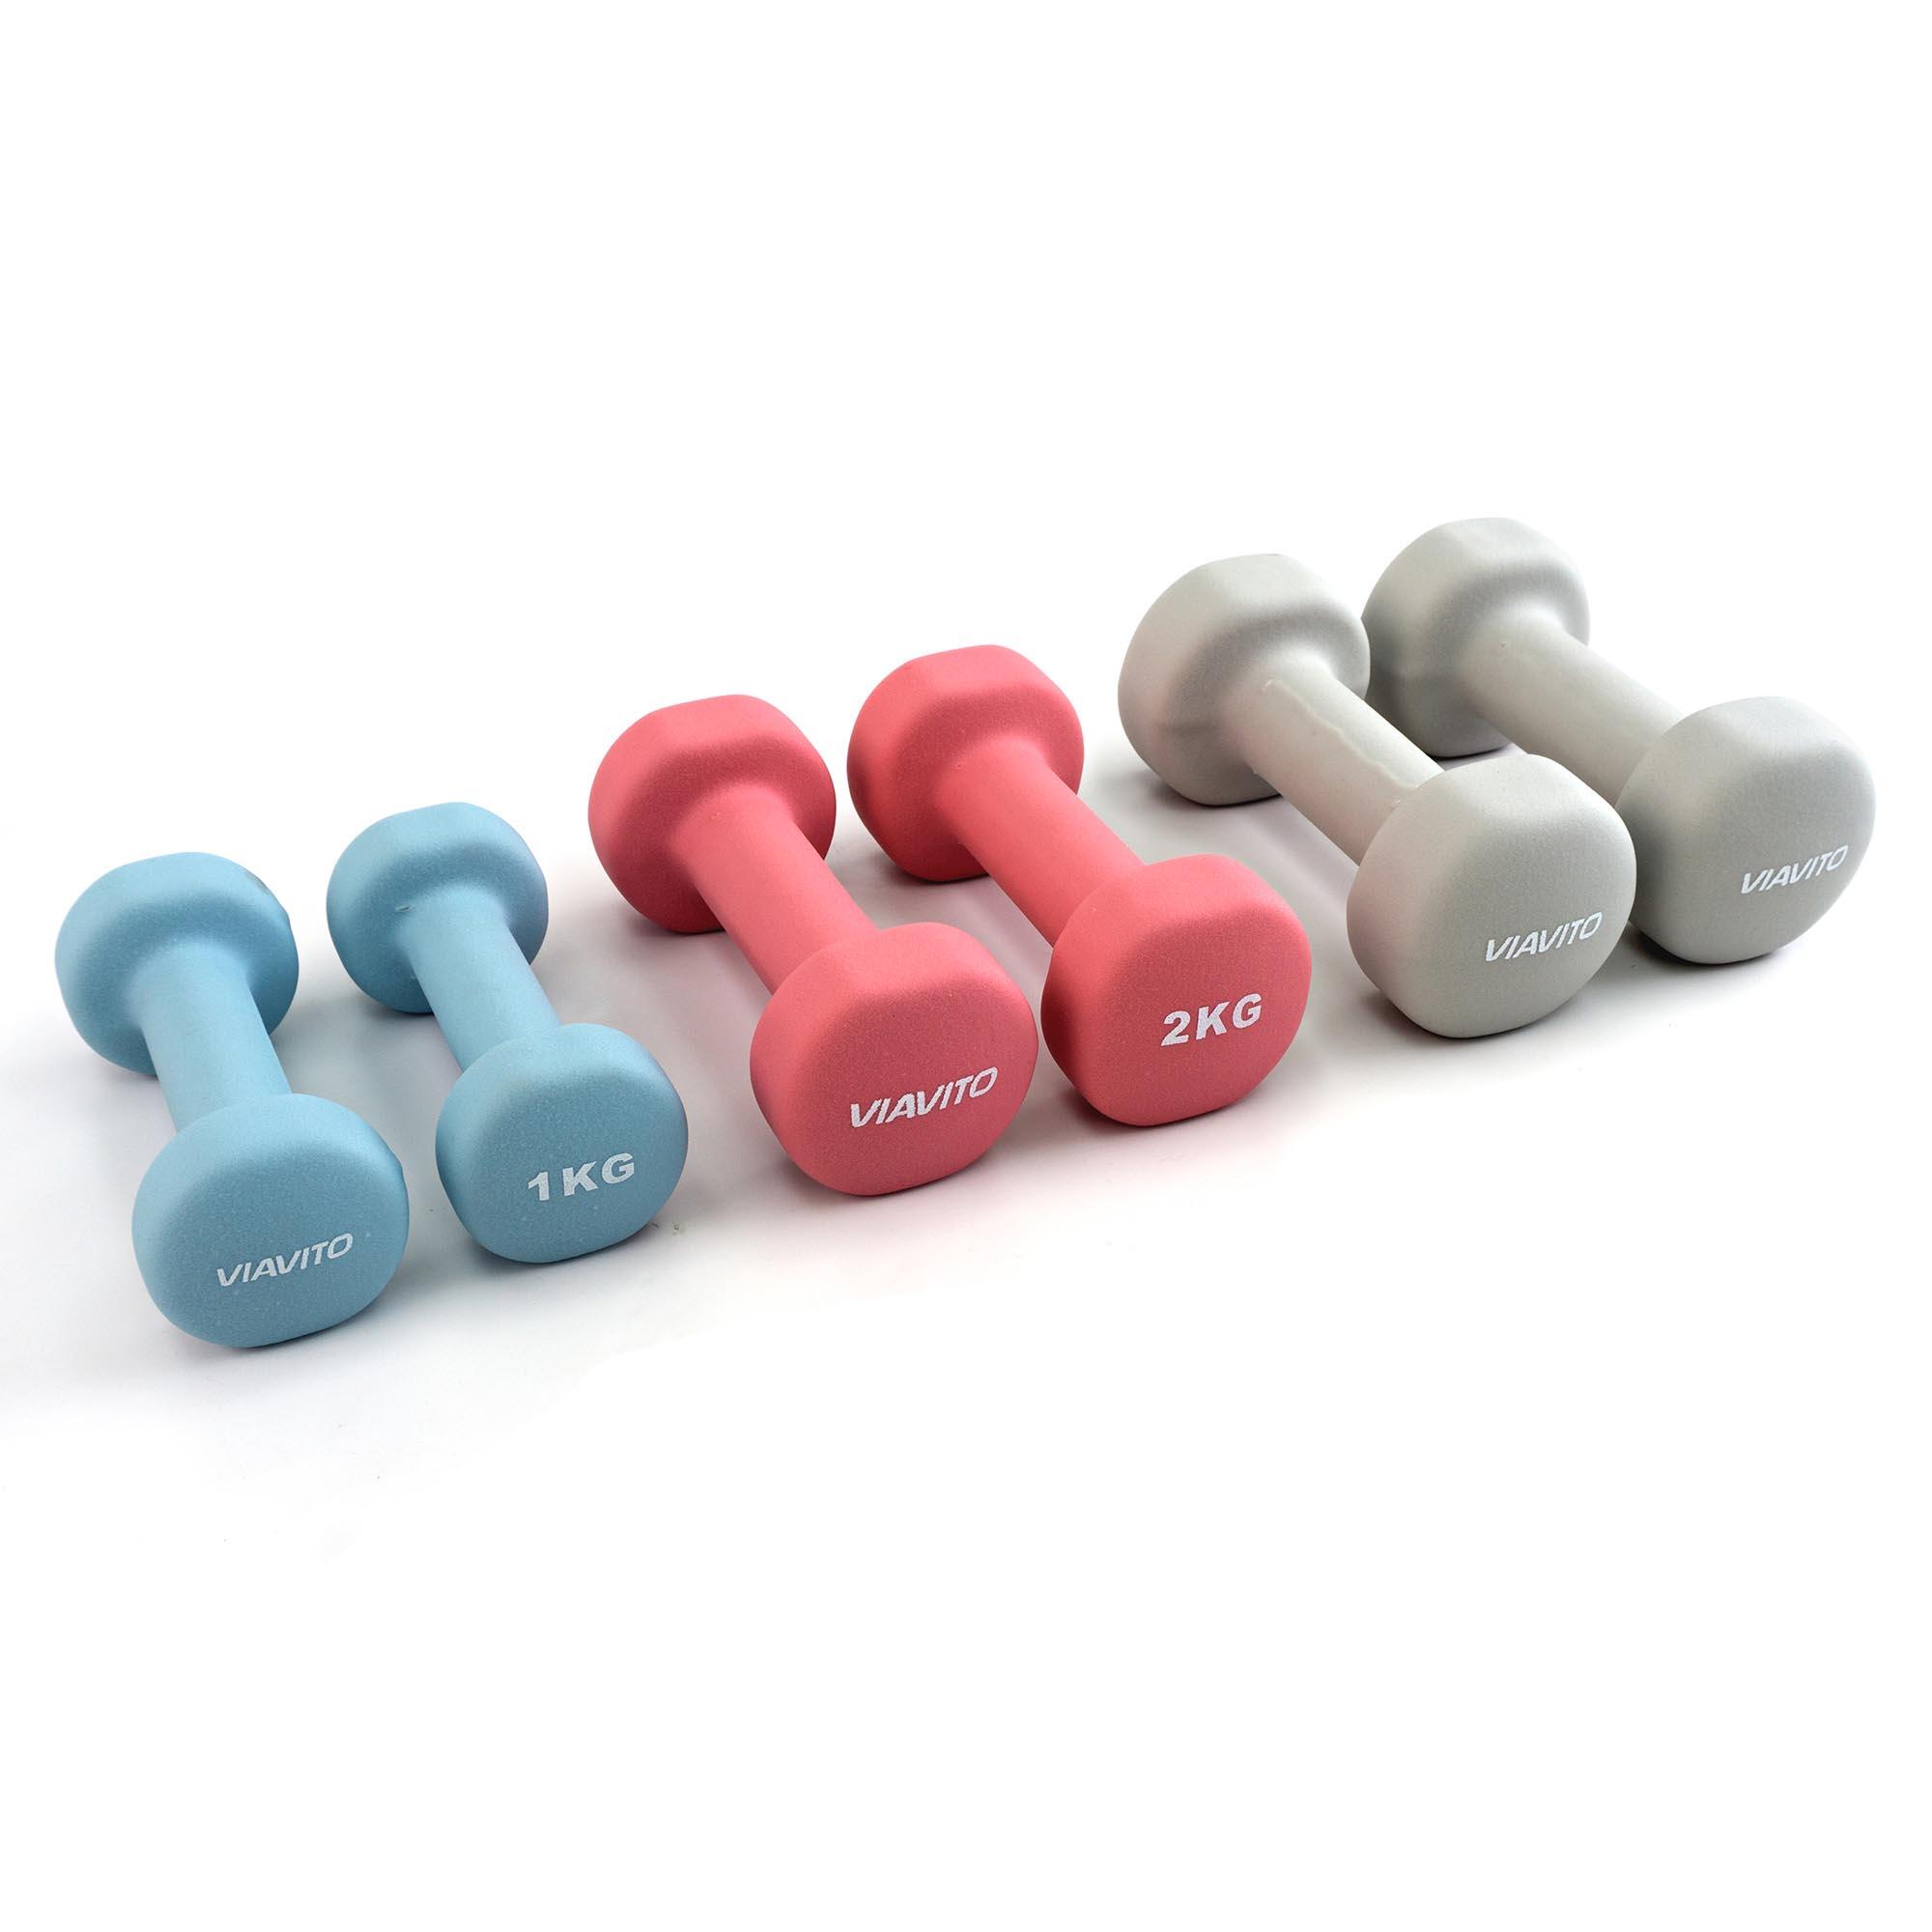 Viavito 12kg Dumbbell Weights Set with Stand 4/6